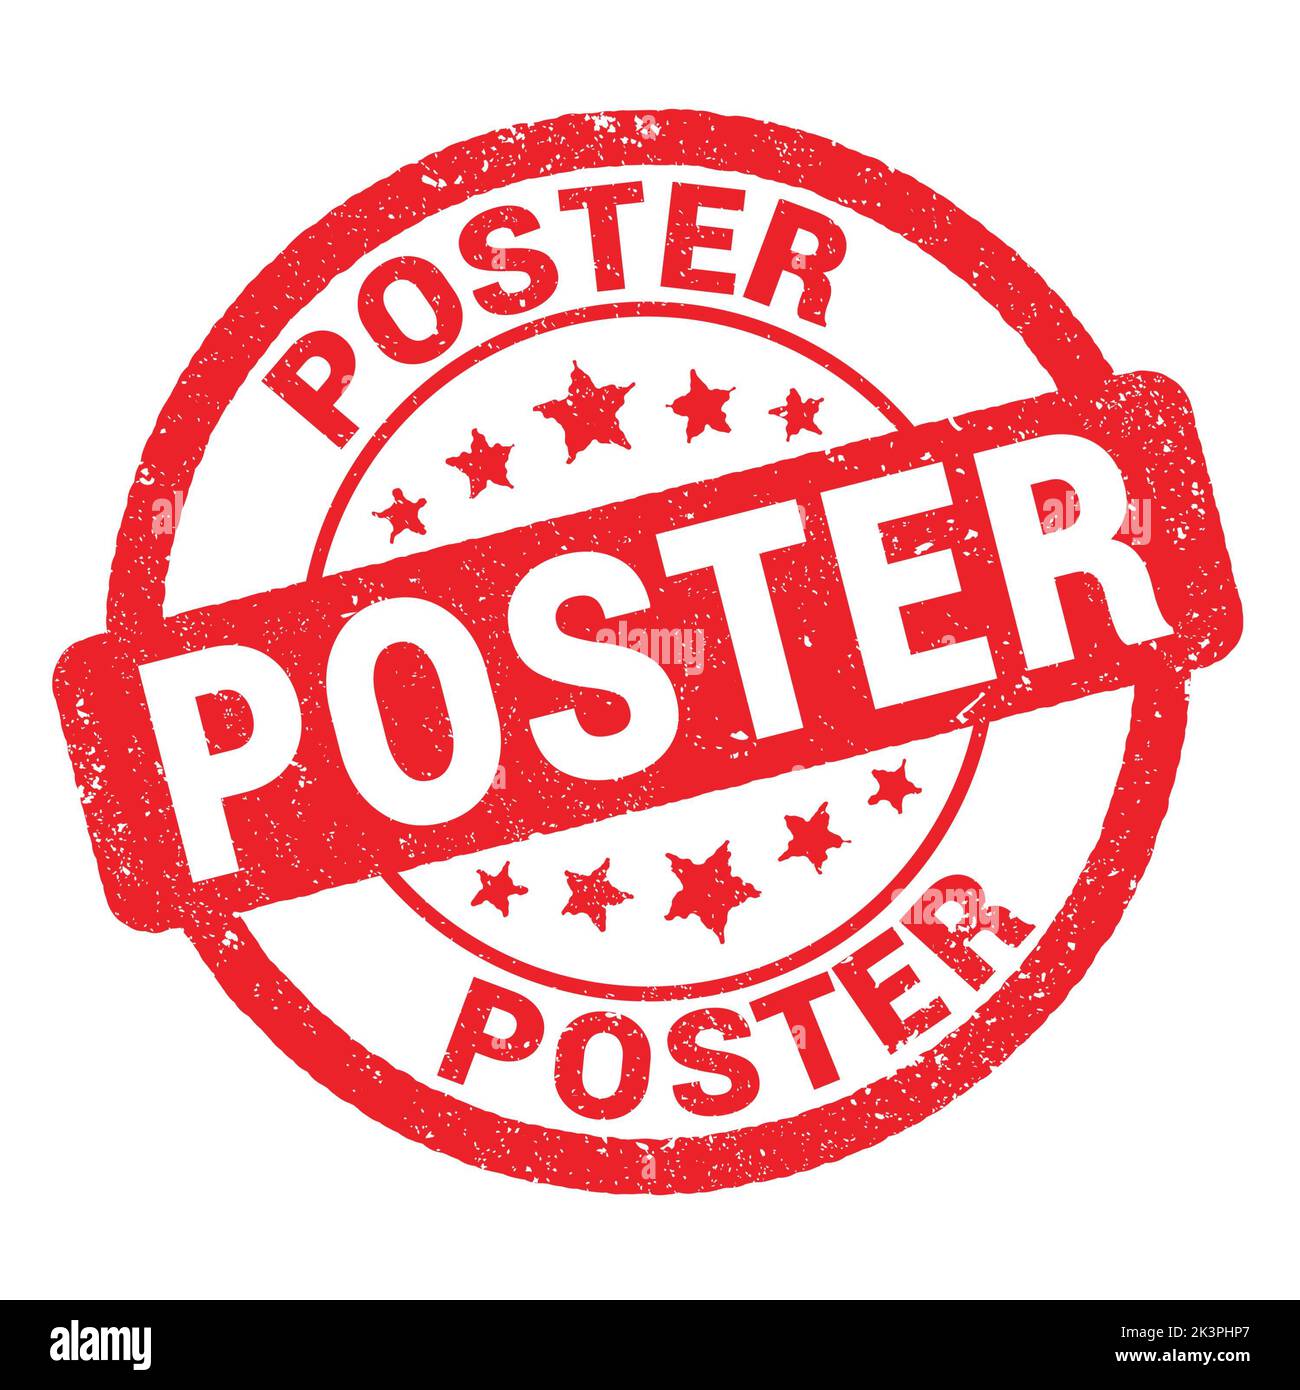 POSTER text written on red grungy stamp sign. Stock Photo